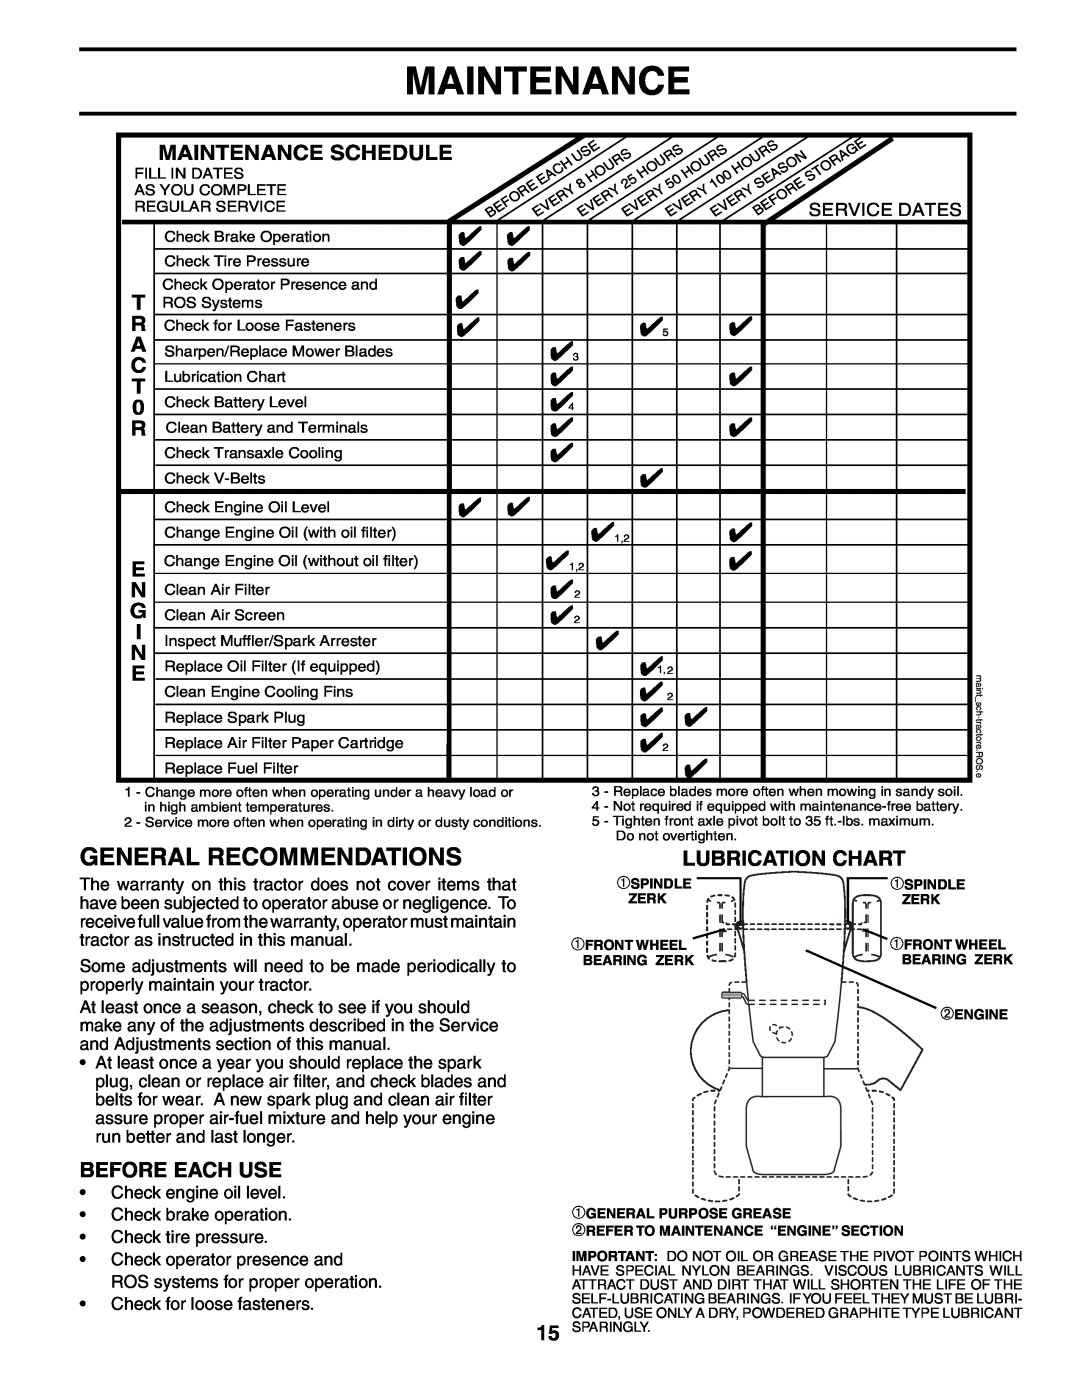 Husqvarna LTH1542 owner manual General Recommendations, Lubrication Chart, Before Each Use, Maintenance Schedule 